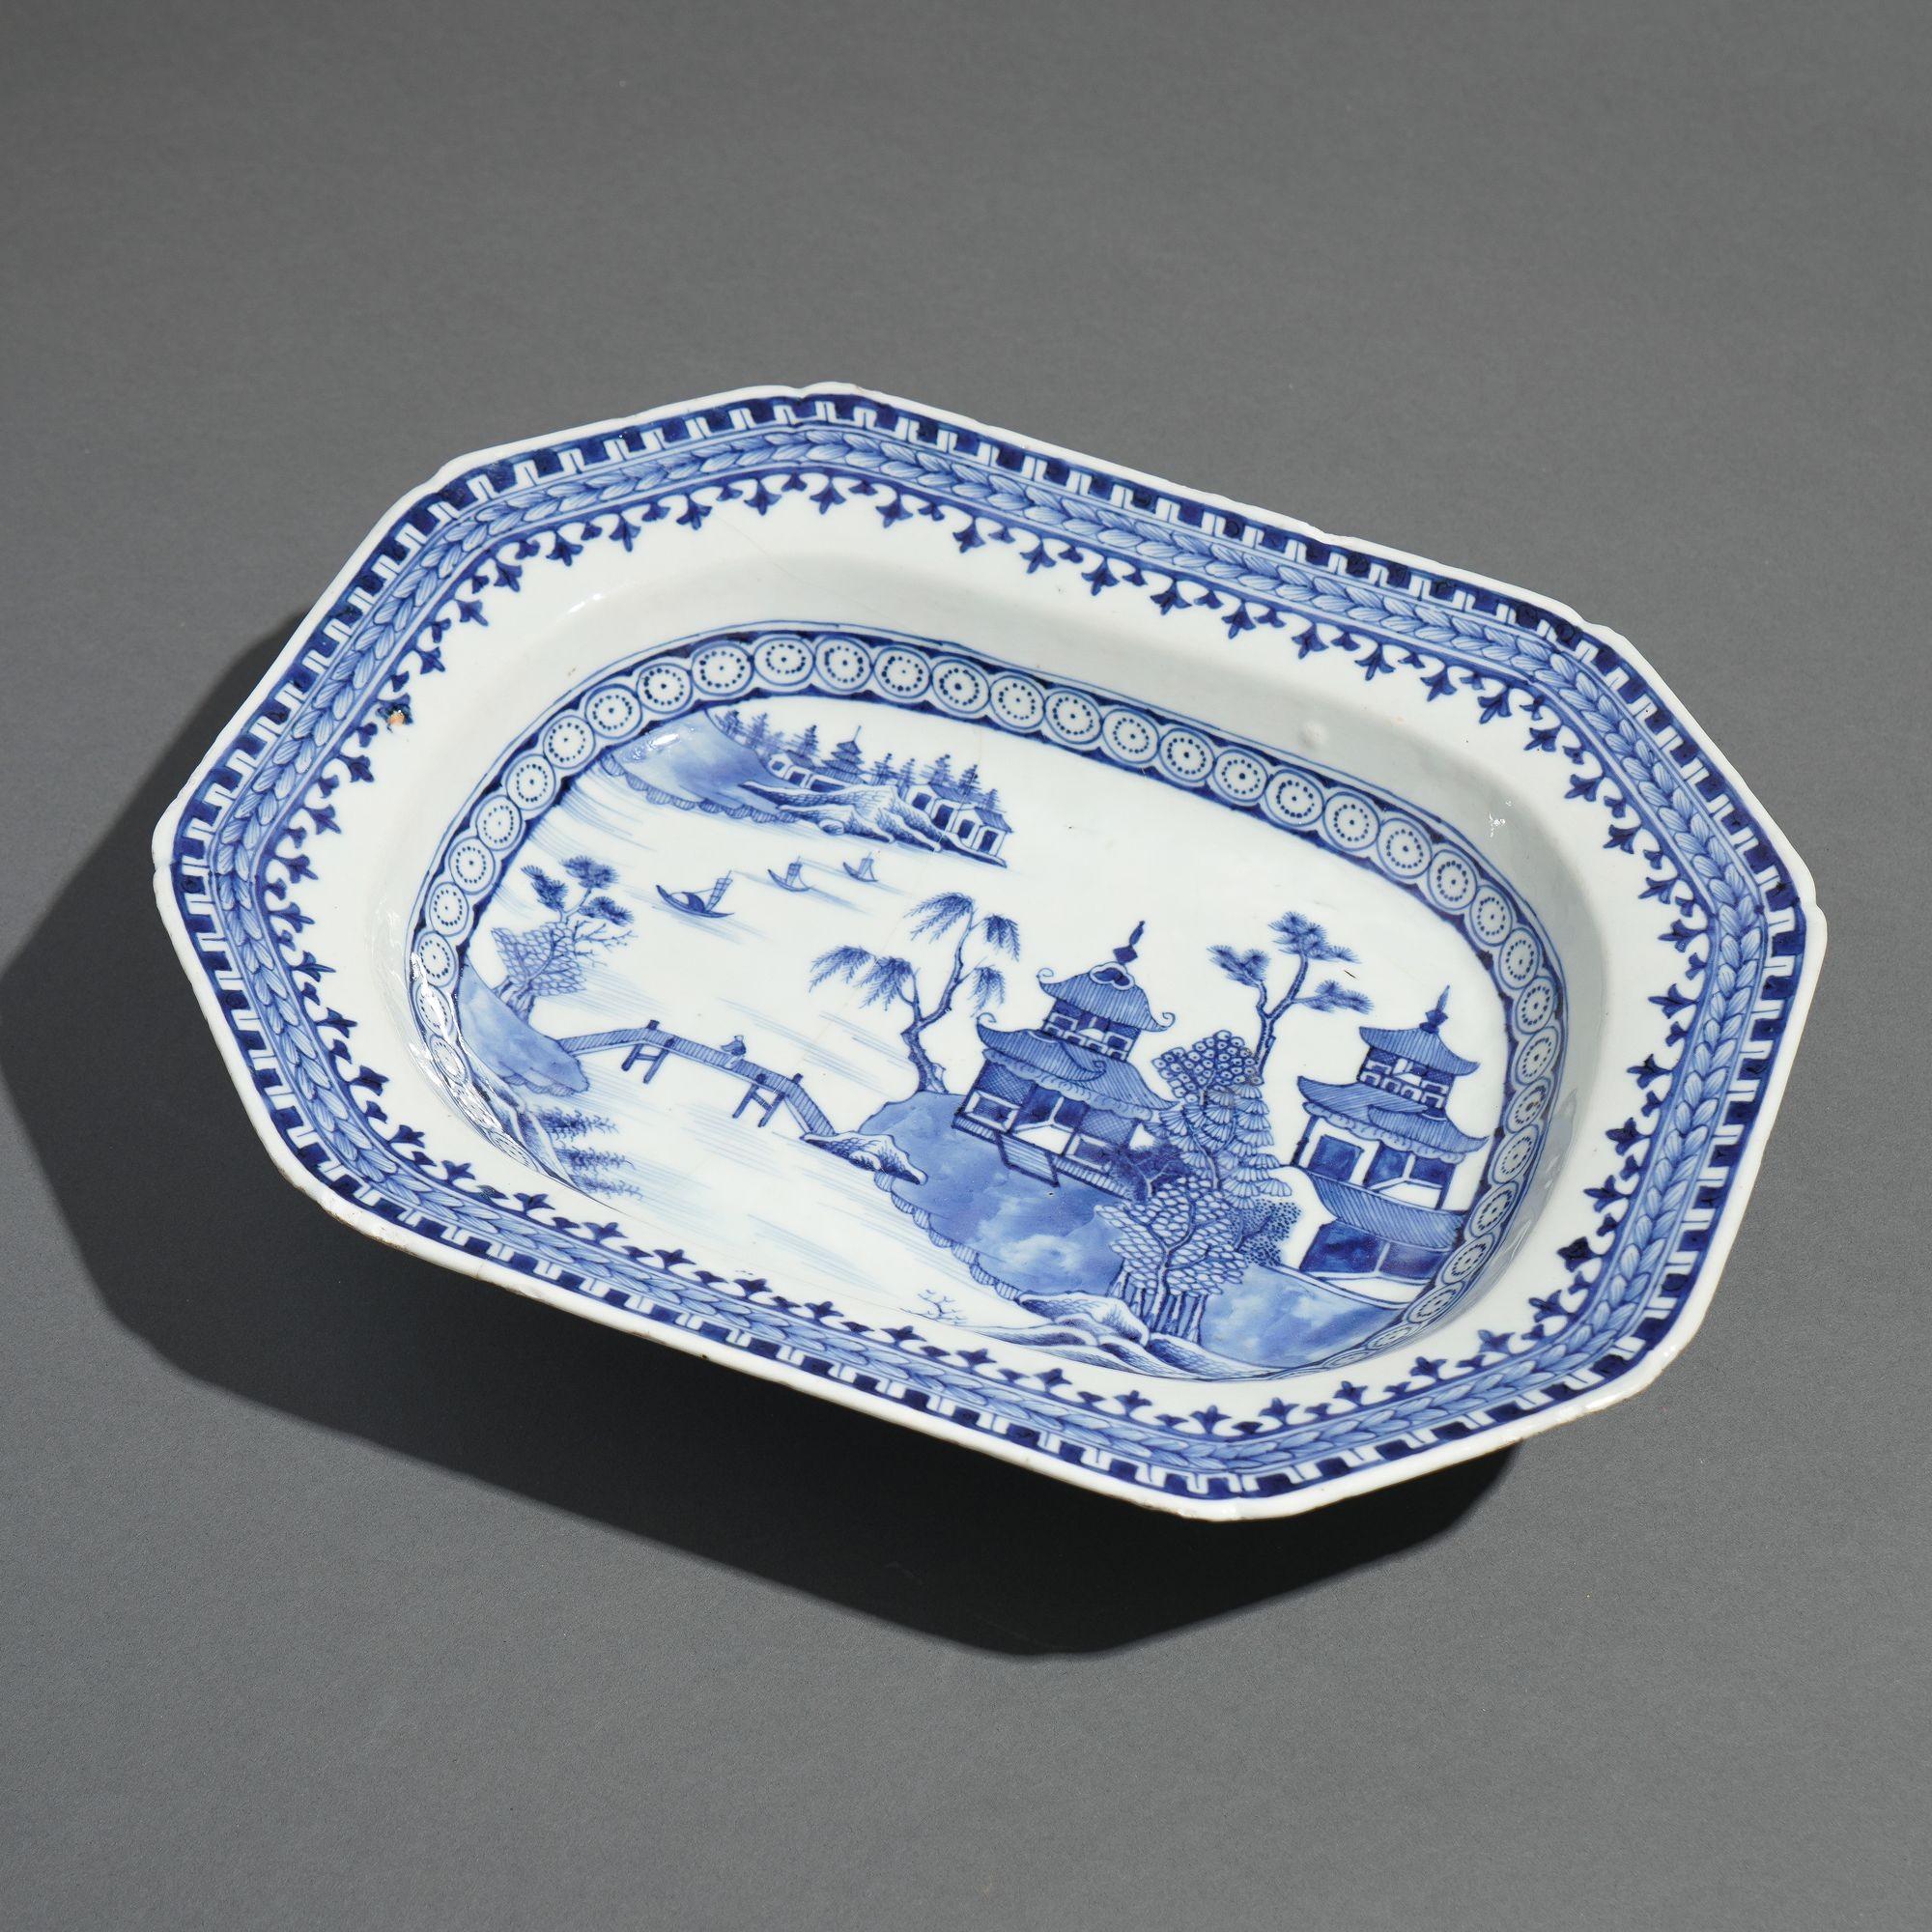 Octagonal porcelain deep platter decorated in the traditional Chinese tea house motif with a Nanking arrow border in underglaze cobalt blue. A fine firing line appears on the underside, and glazing chips appear along the rim.

China, made for the